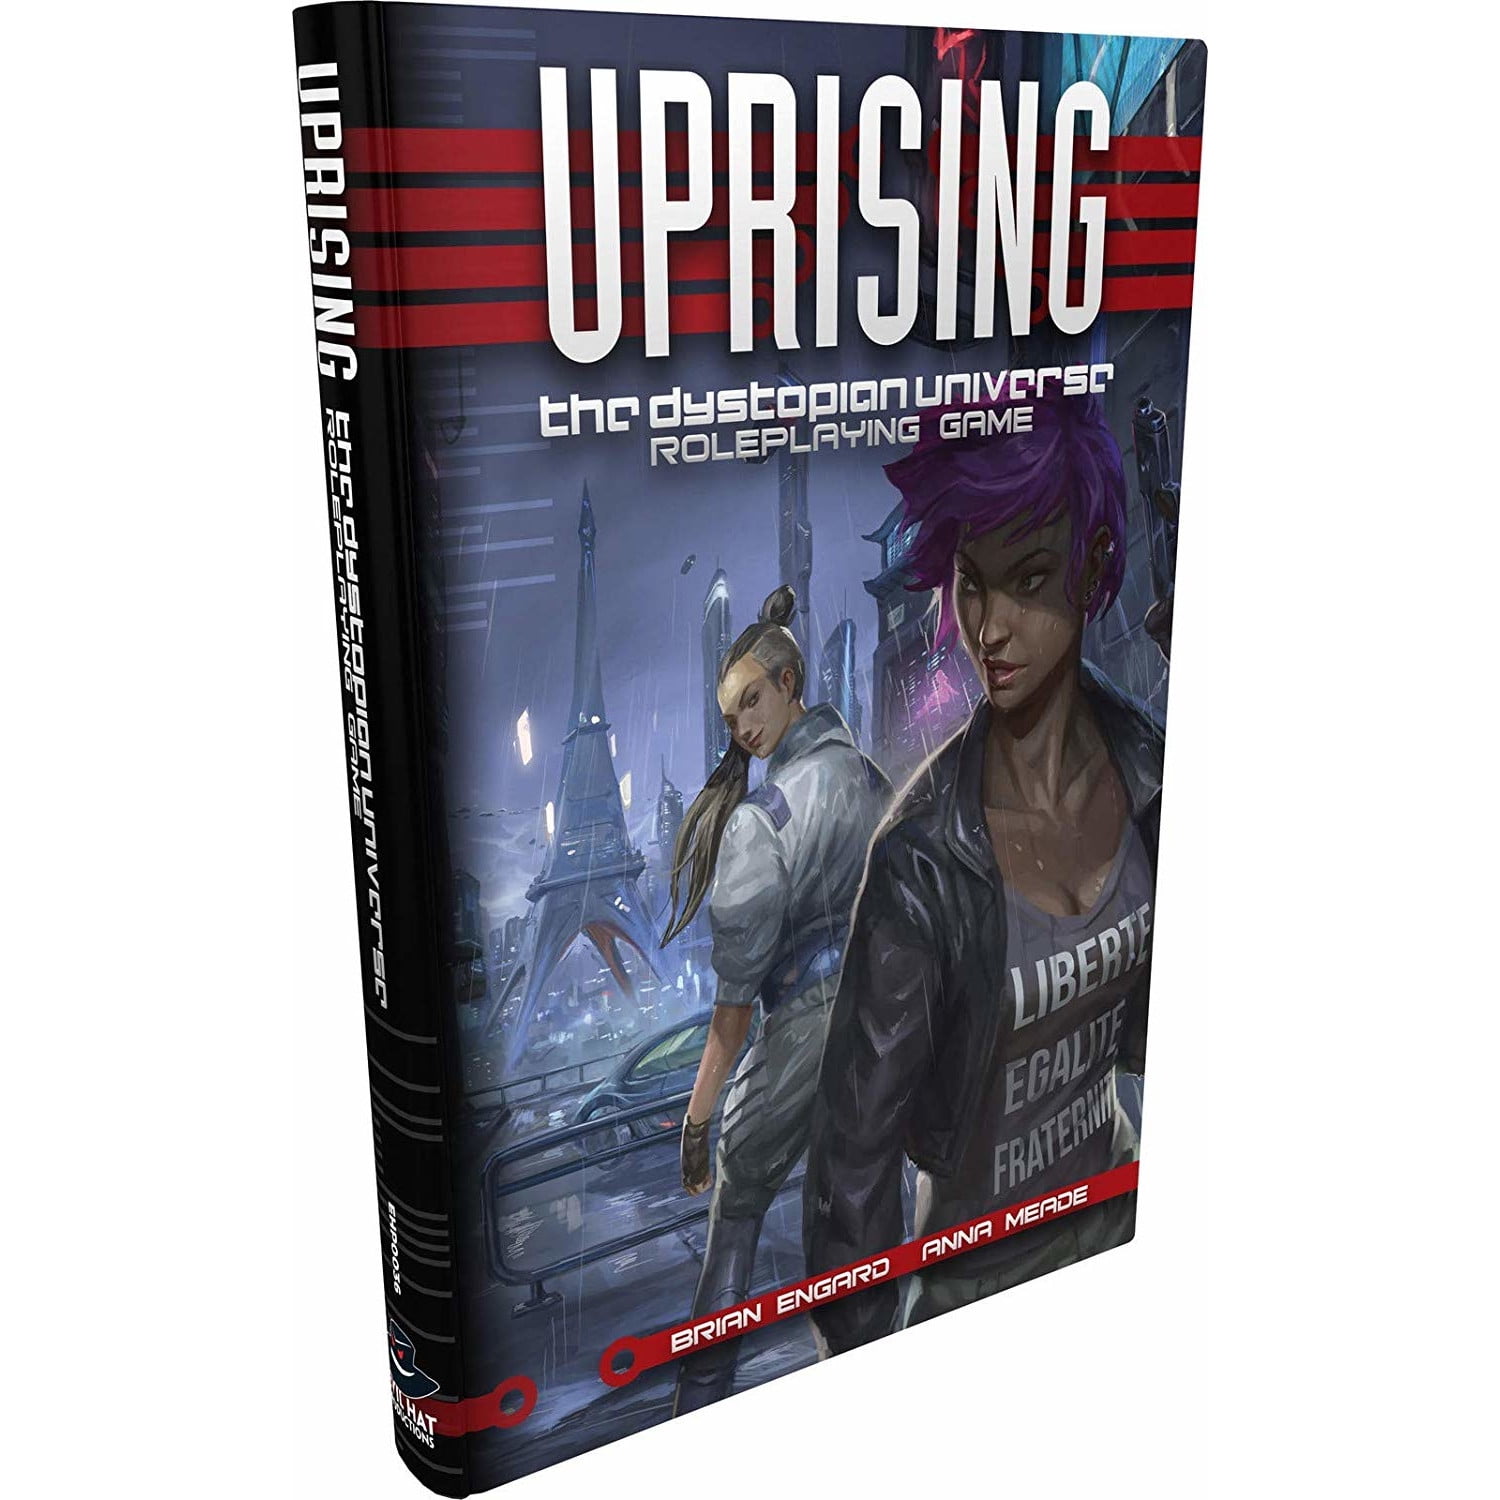 Ehp0036 Uprising The Dystopian Universe Rpg Game